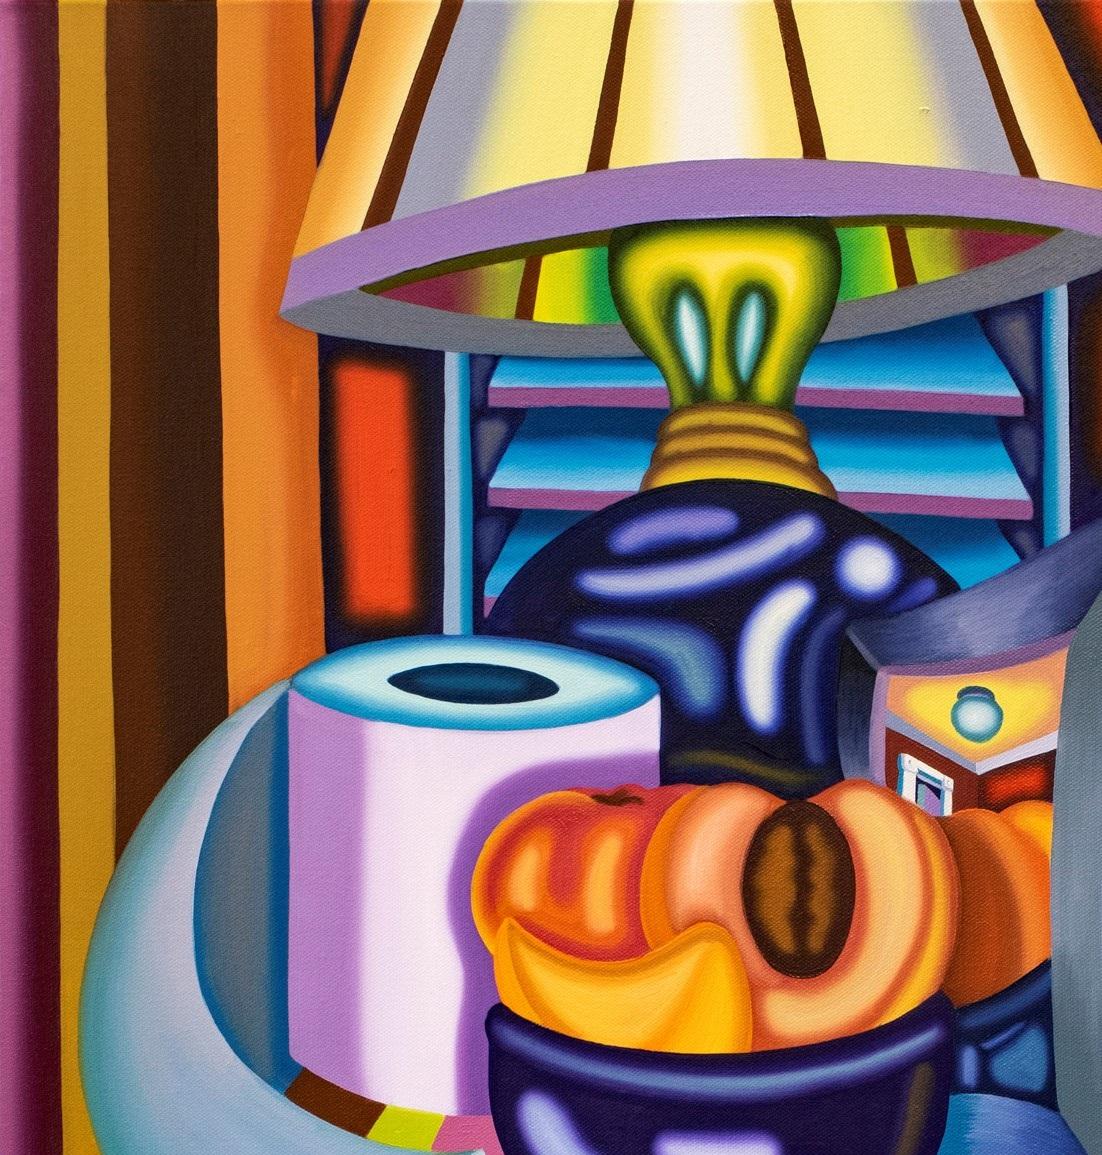 PEACHY KEEN FLAMING JACK STILL LIFE - Cubist, Bright & Bold Surreal Night Stand  - Painting by Jason Stout